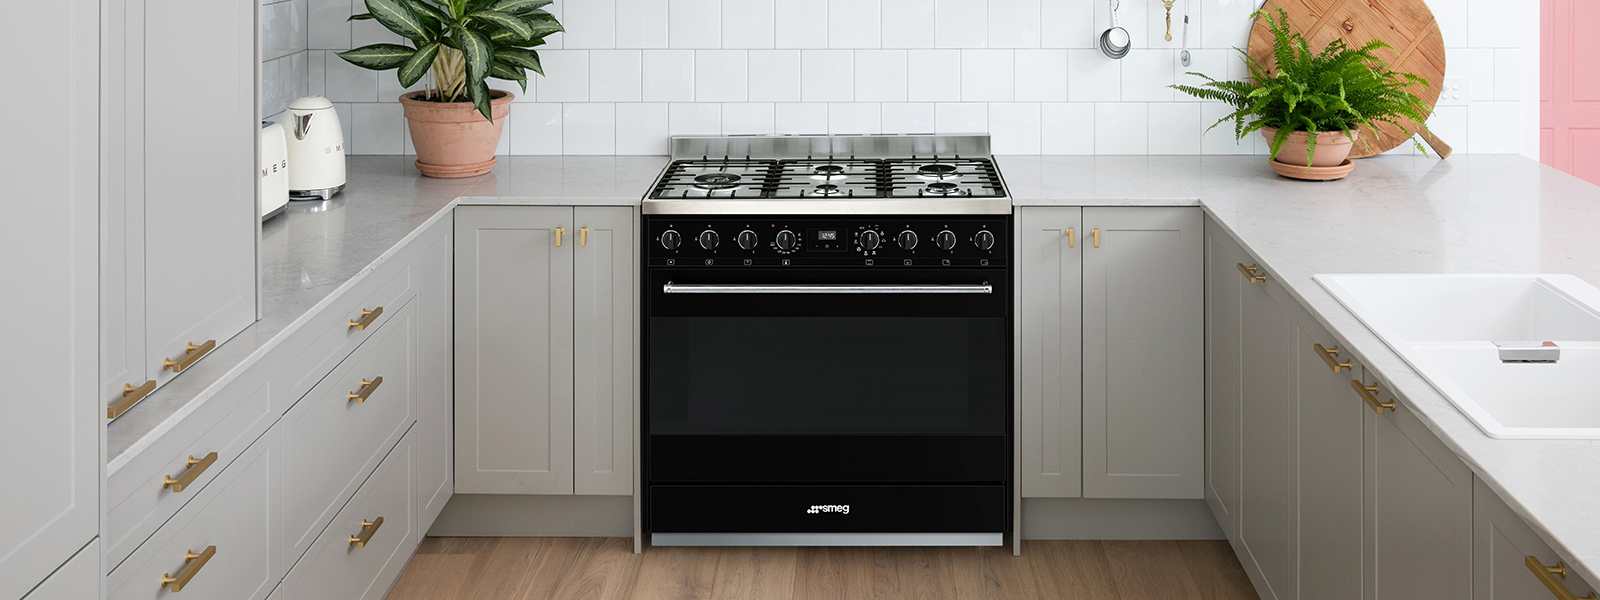 Total 5-year warranty on Smeg Classic and Victoria freestanding cookers at Hart & Co